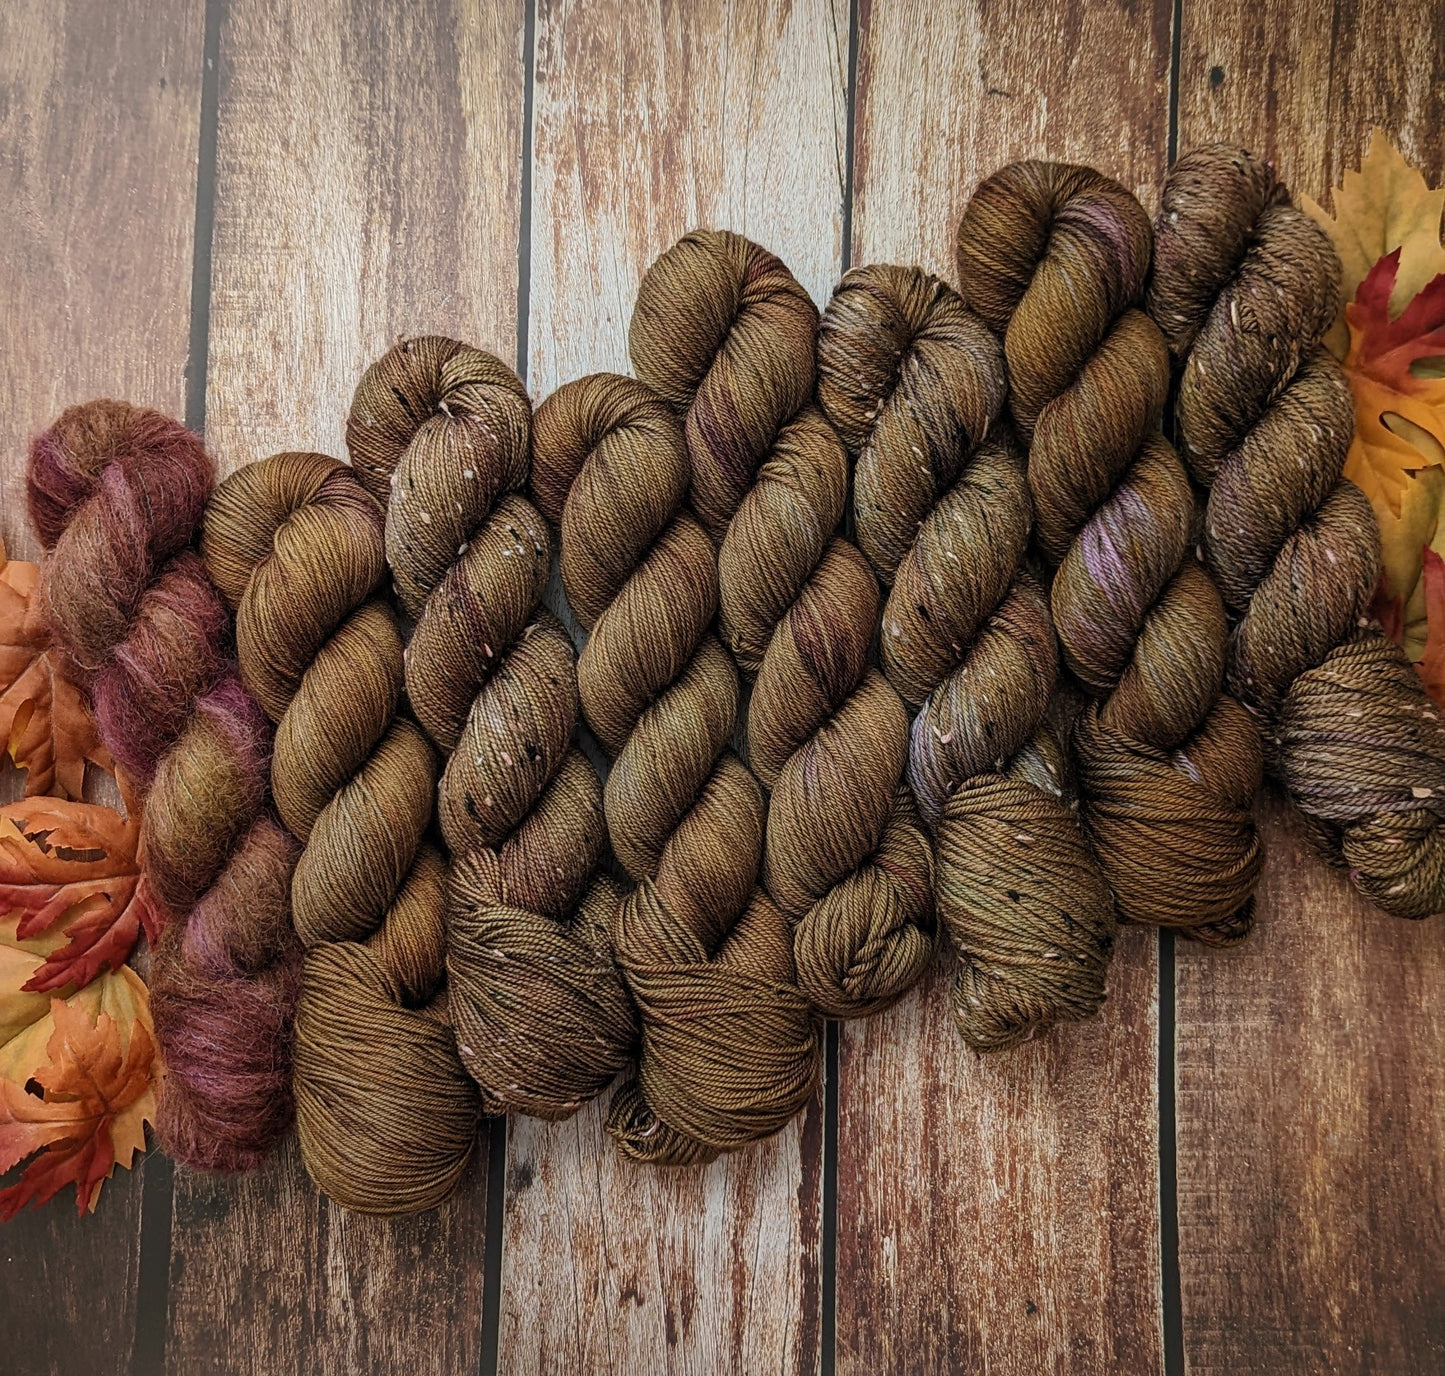 Dried Leaves - Sweater Quantity (multiples of 3)